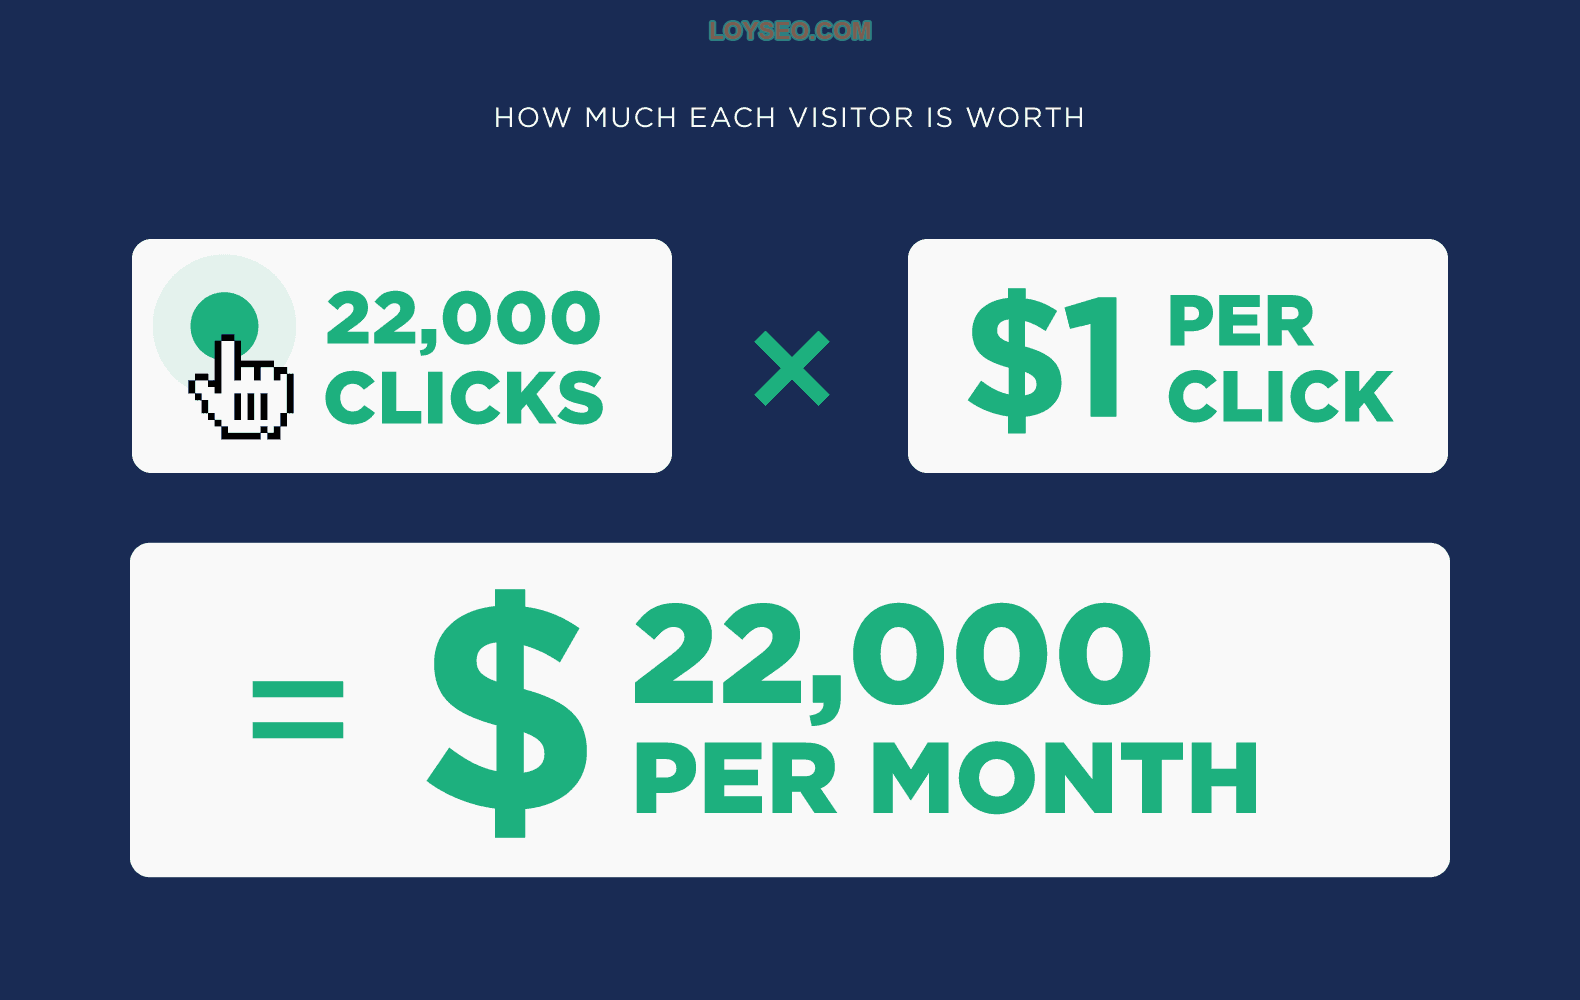 How much each click is worth